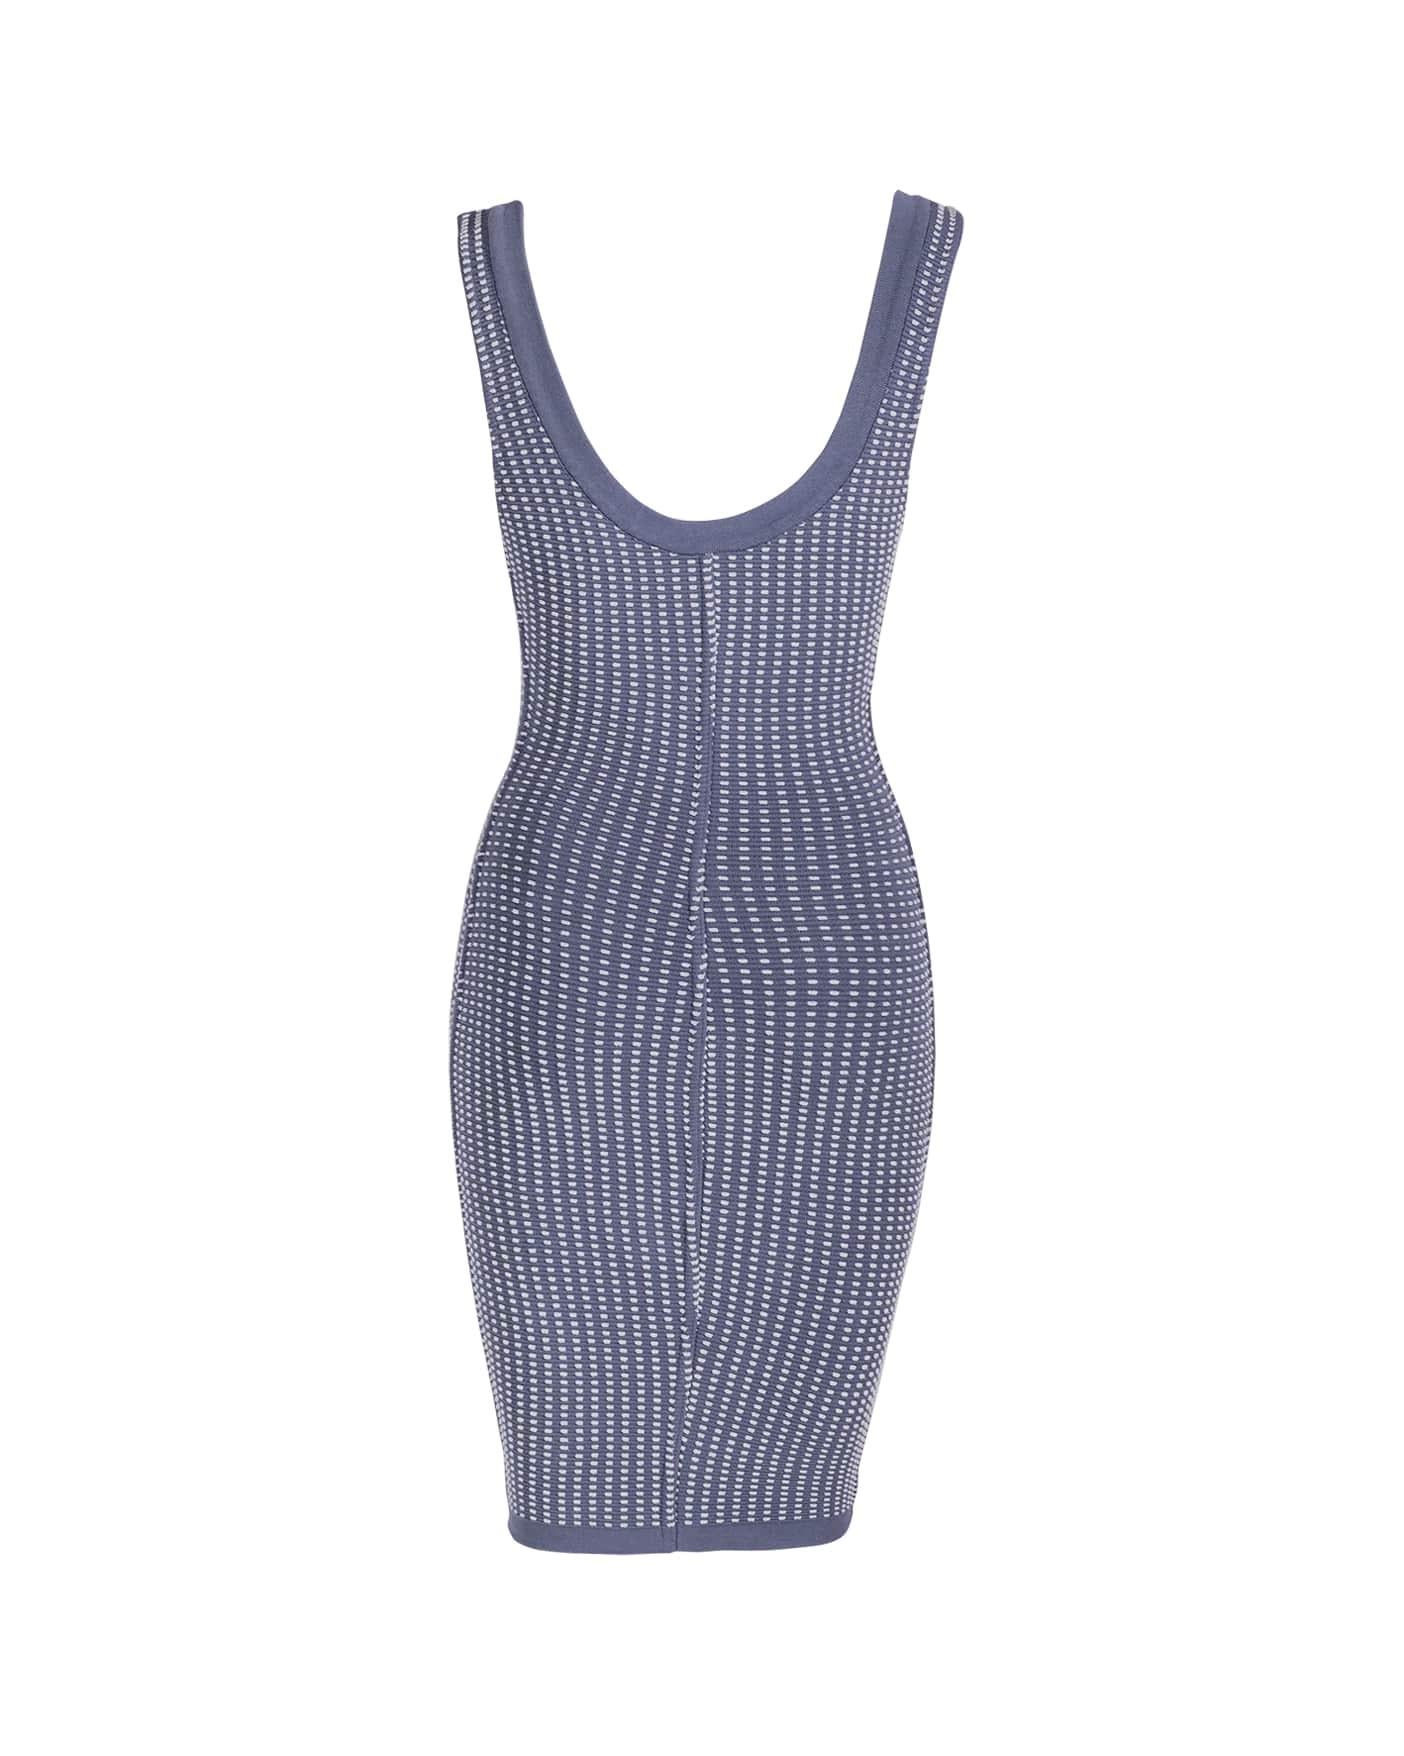 S/S 1990 Azzedine Alaia Polka Dot Blue Mini Dress In Excellent Condition In North Hollywood, CA